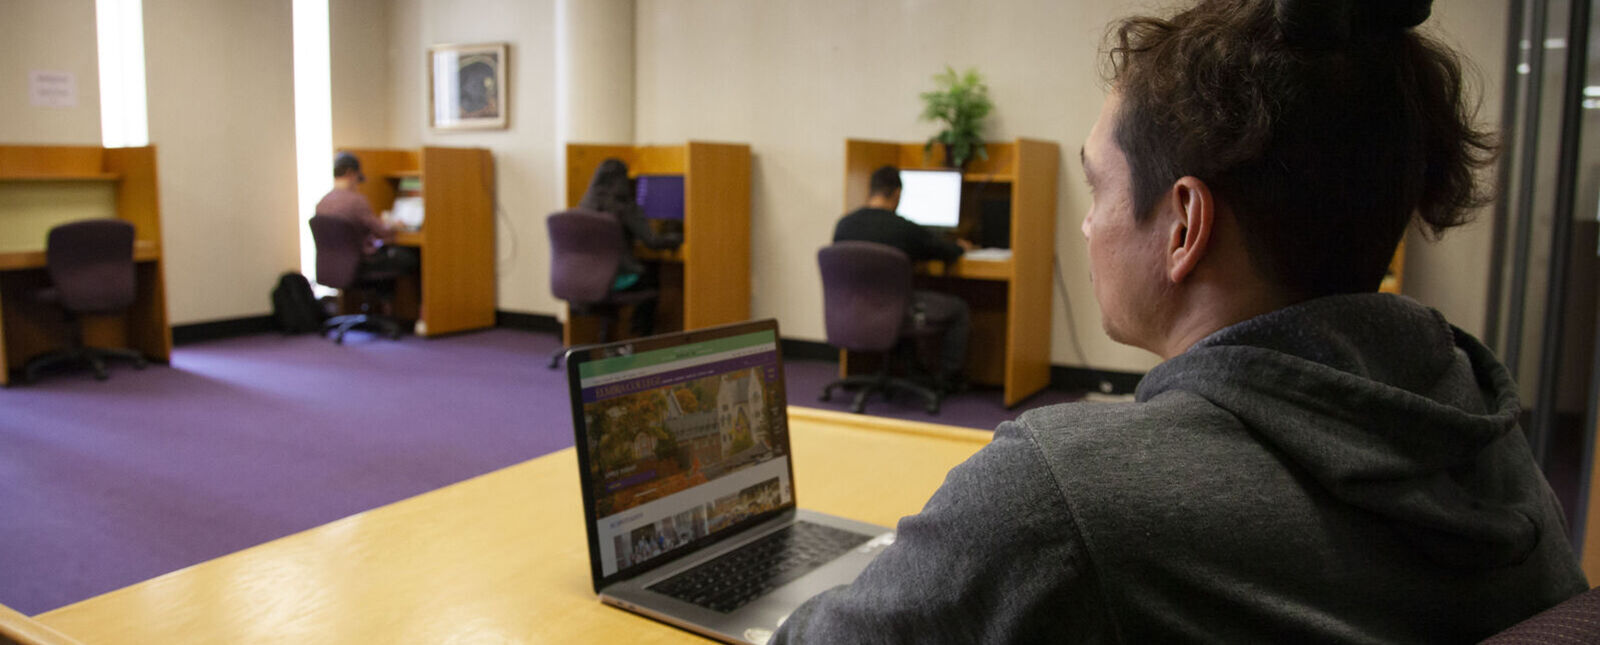 An employee monitors test takers in the Center for Academic and Professional Excellence